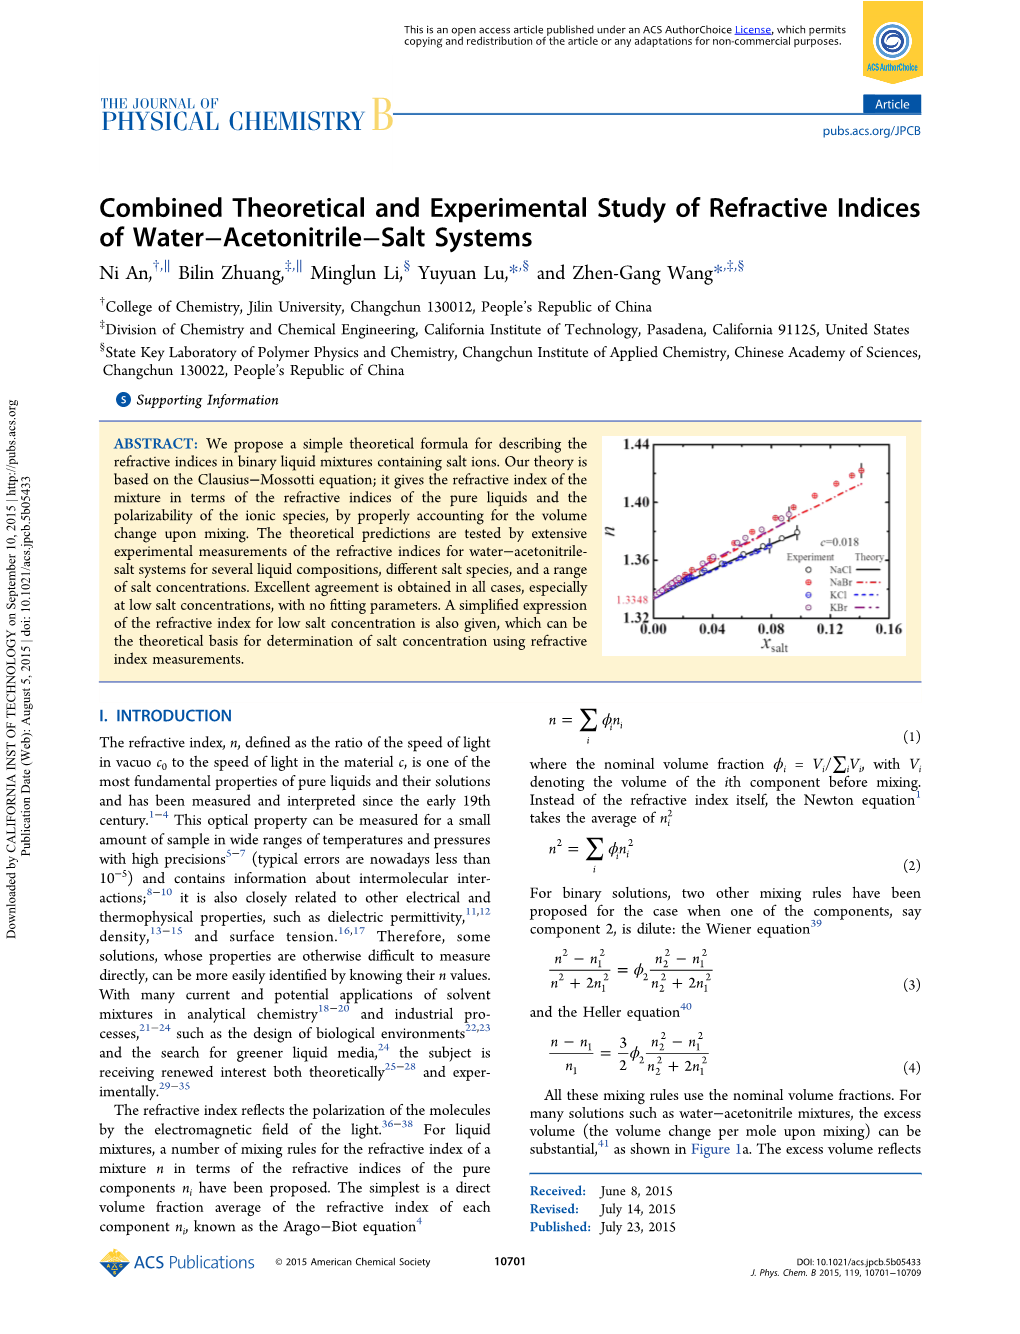 Combined Theoretical and Experimental Study of Refractive